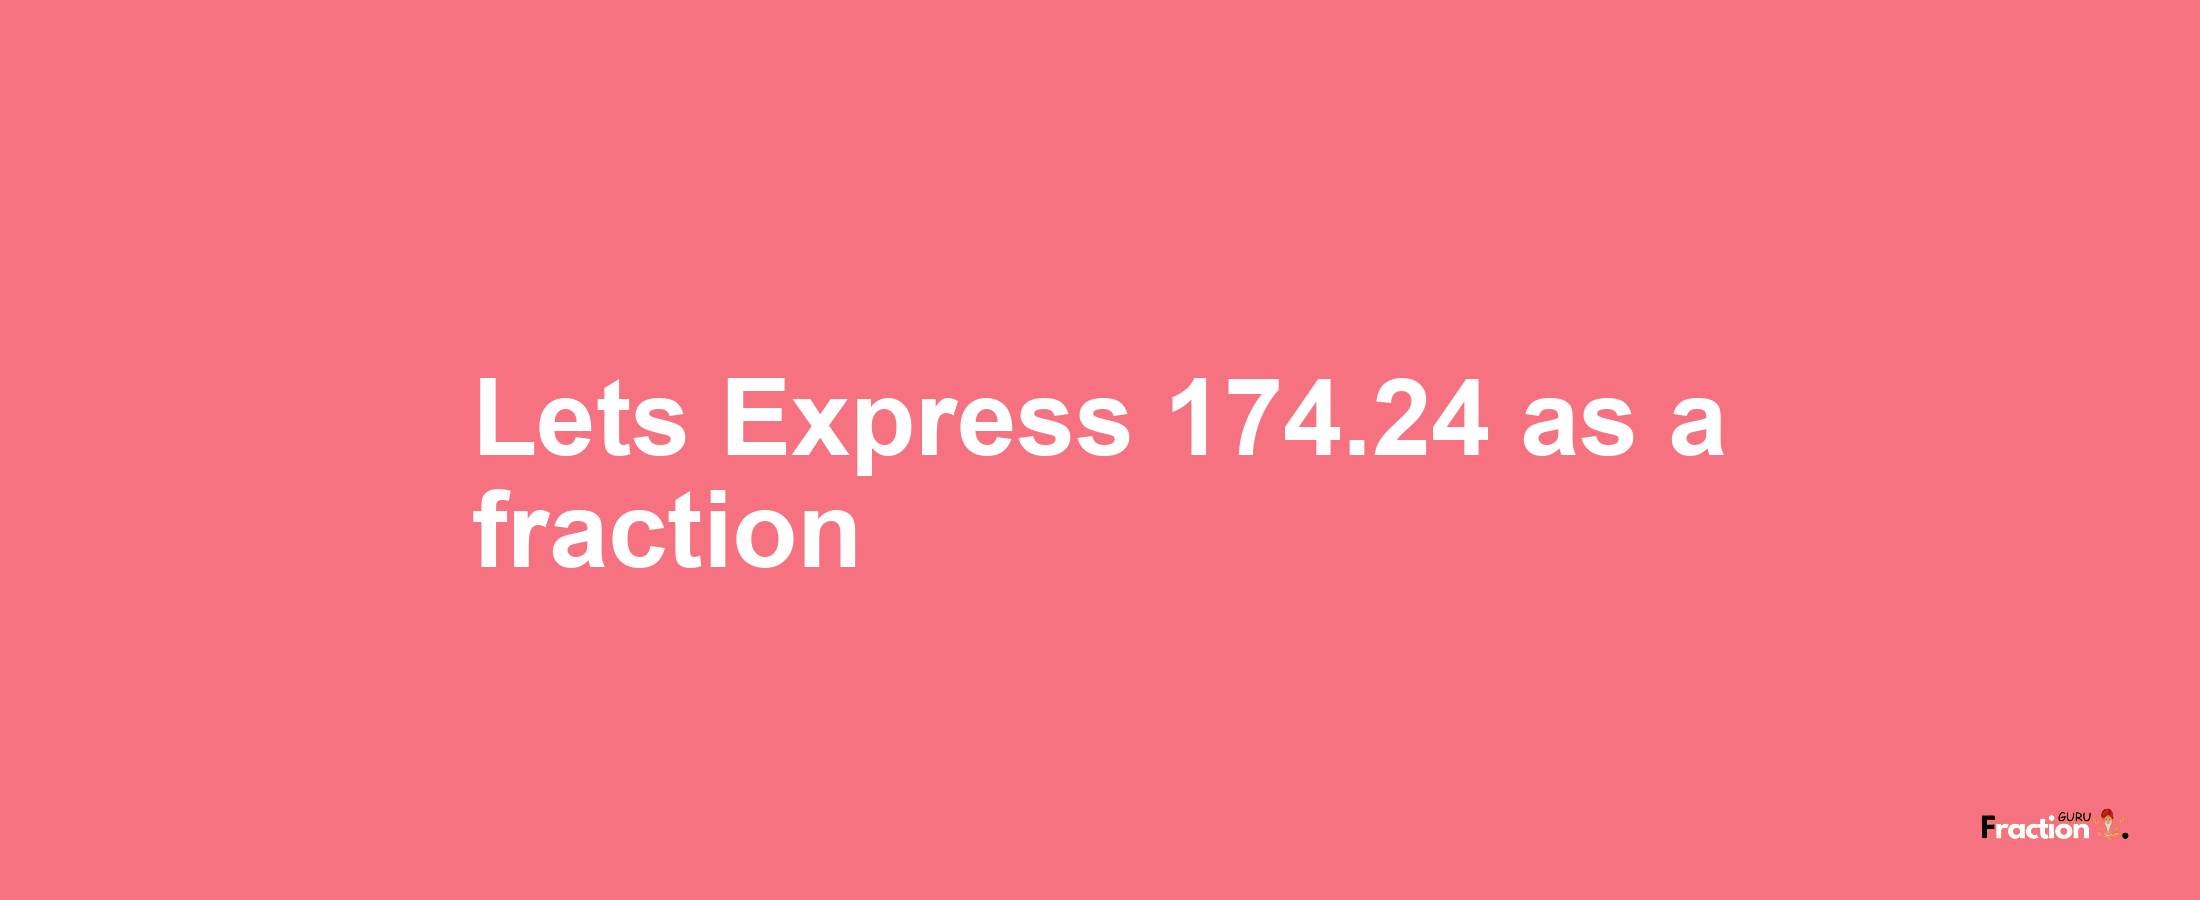 Lets Express 174.24 as afraction